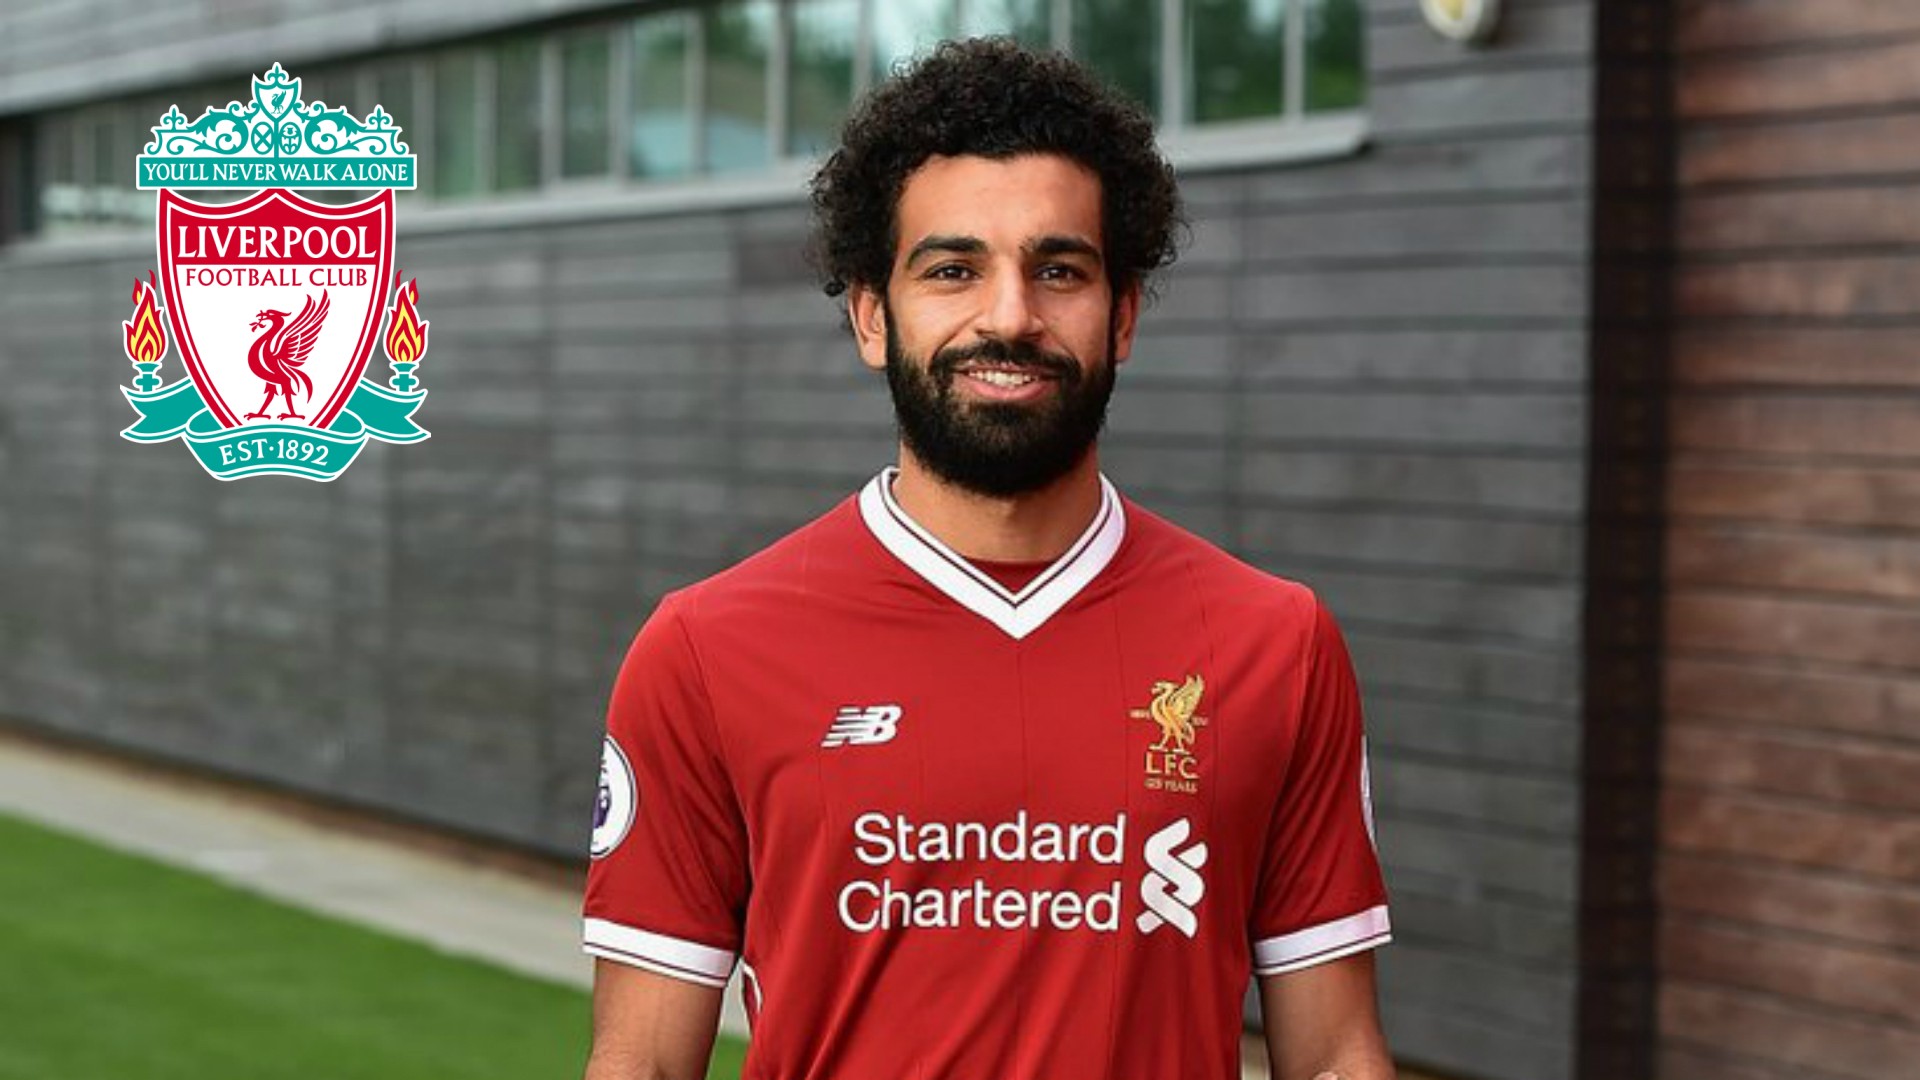 HD Wallpaper Liverpool Mohamed Salah With Resolution 1920X1080 pixel. You can make this wallpaper for your Desktop Computer Backgrounds, Mac Wallpapers, Android Lock screen or iPhone Screensavers